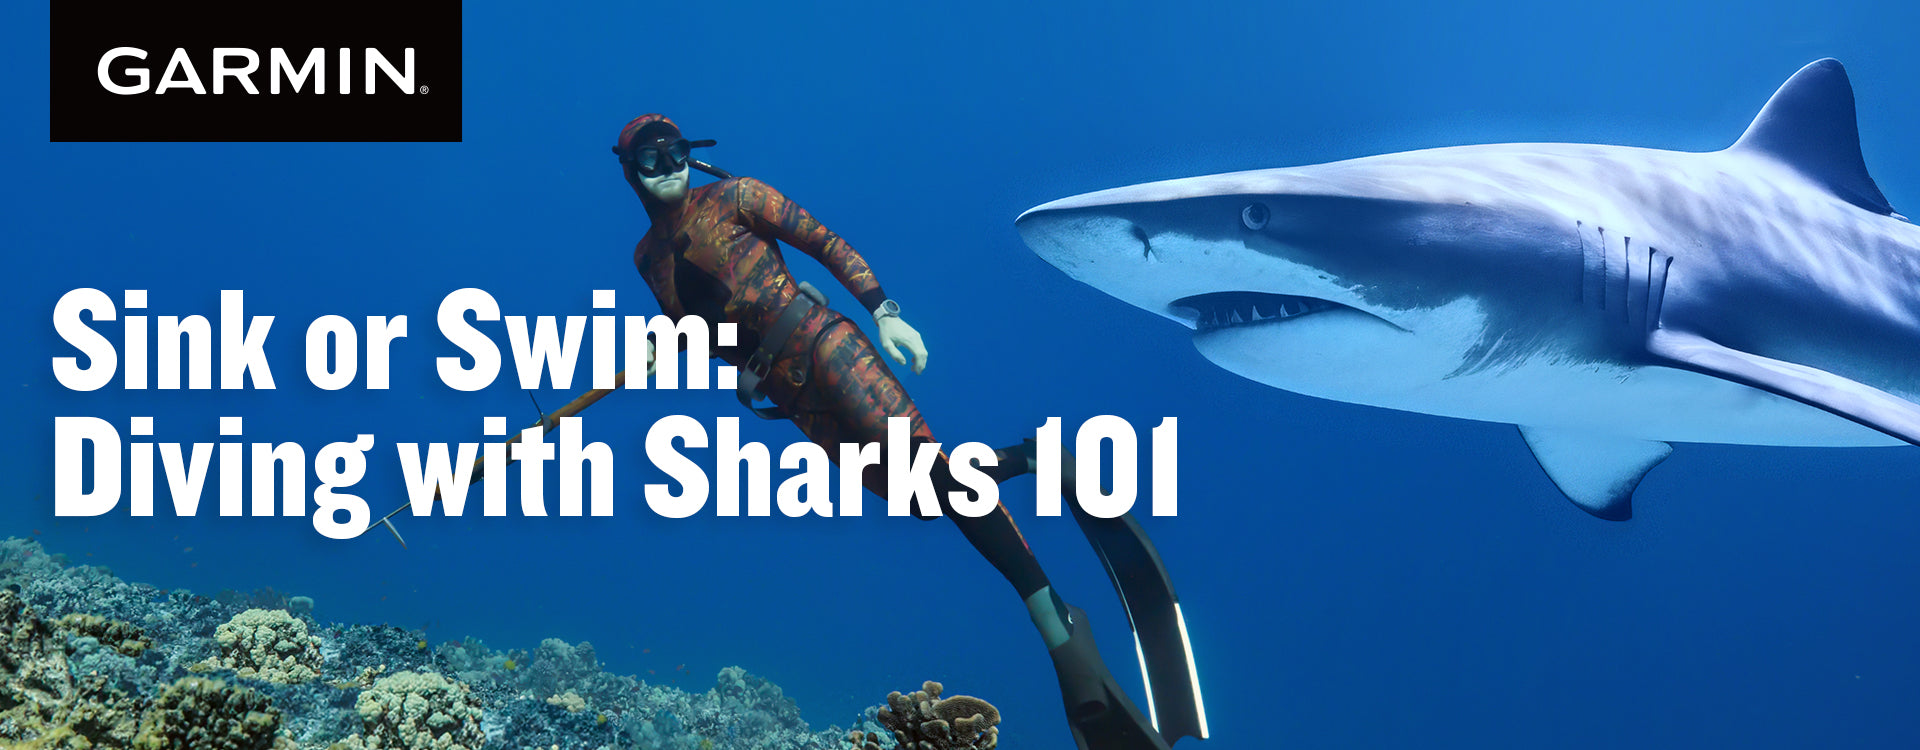 Sink or Swim: Diving with Sharks 101